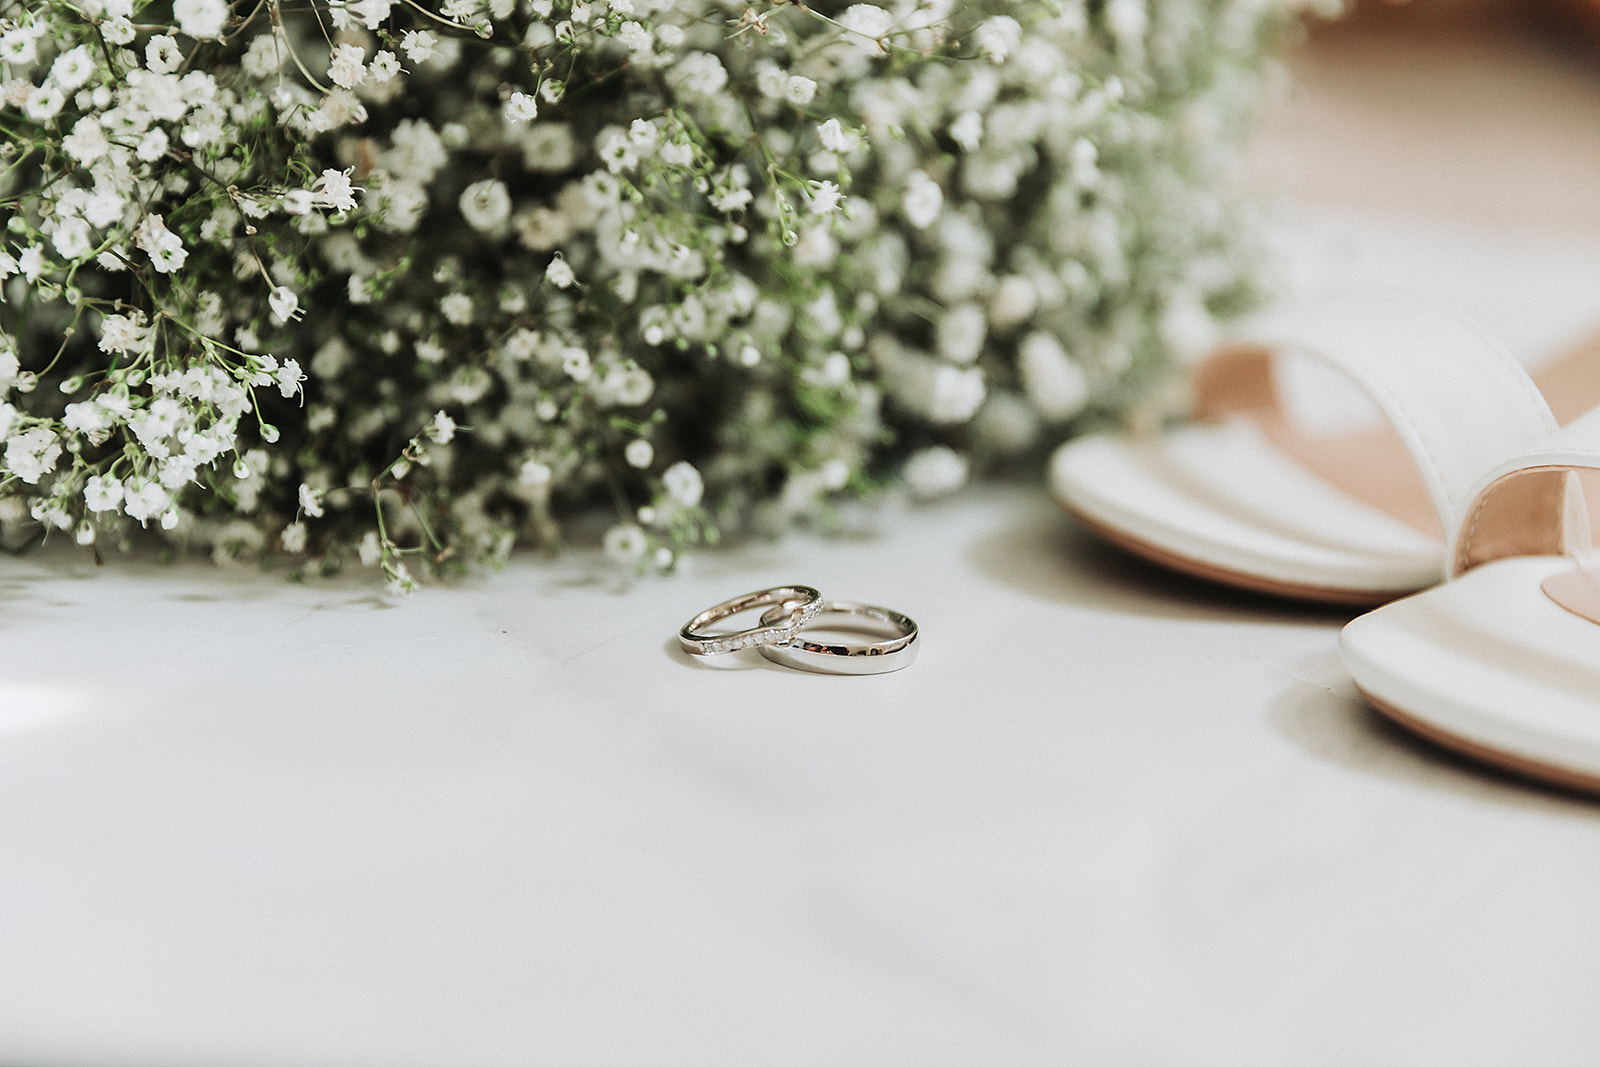 Wedding Rings, laying infront of wedding flowers and wedding shoes. Photo by Perfect Memories Photography